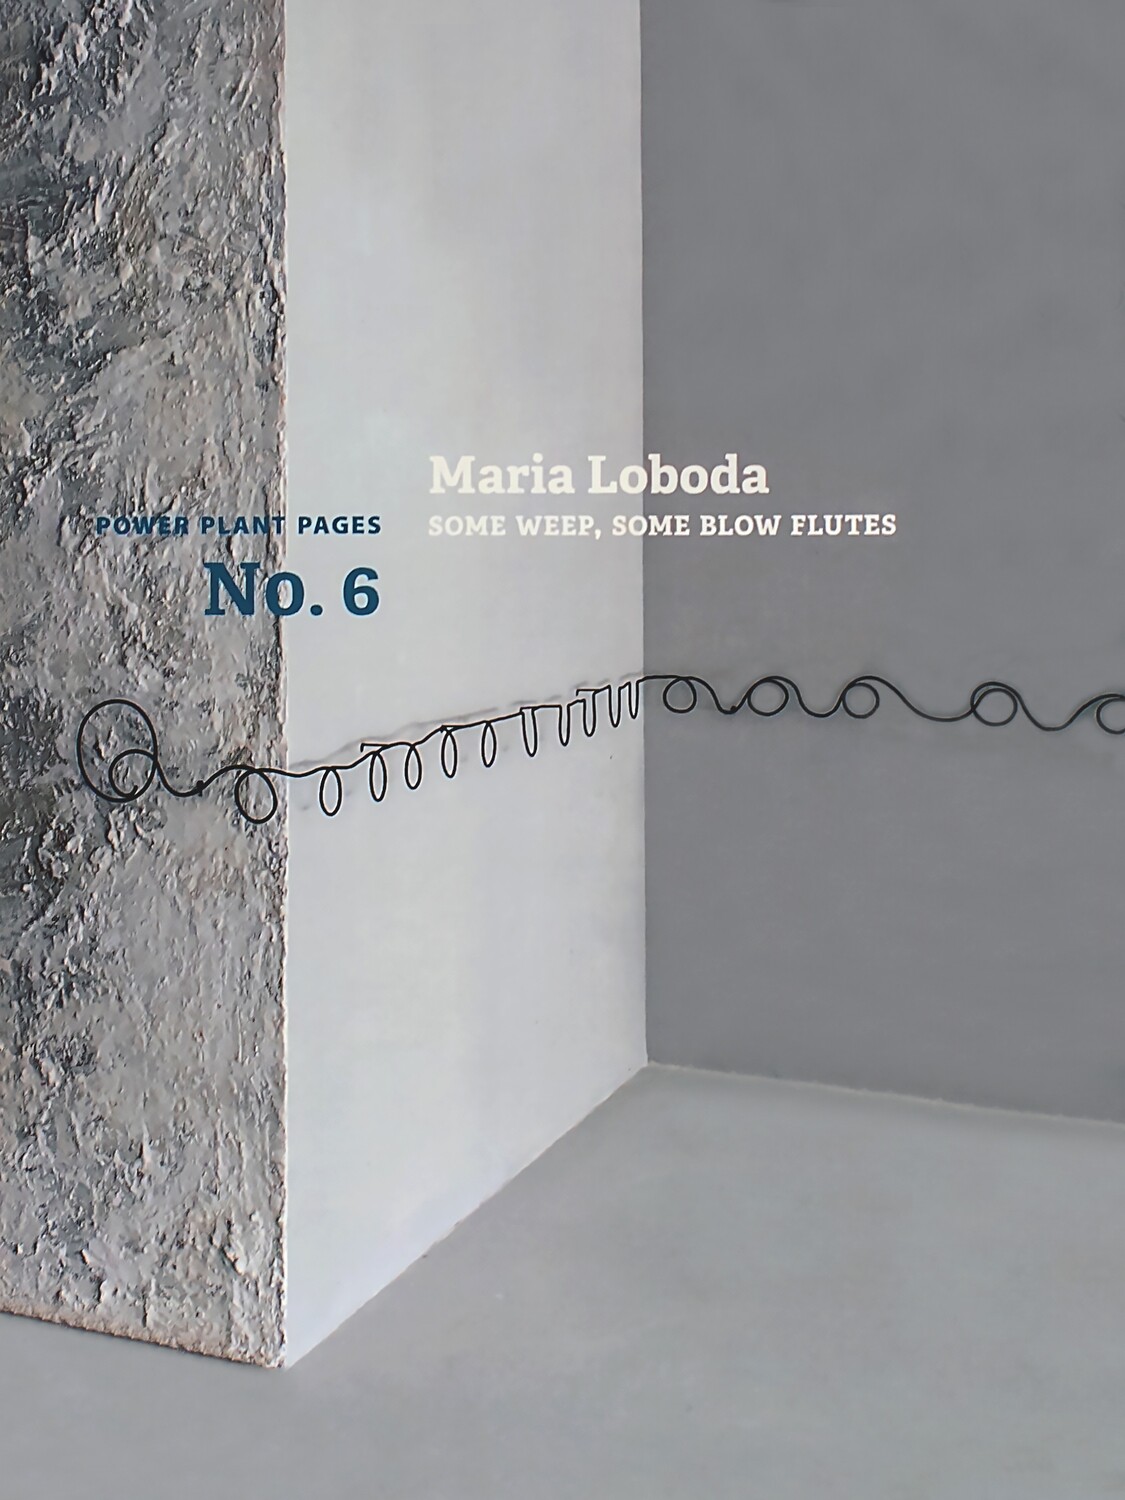 Maria Loboda: Some weep, some blow flutes